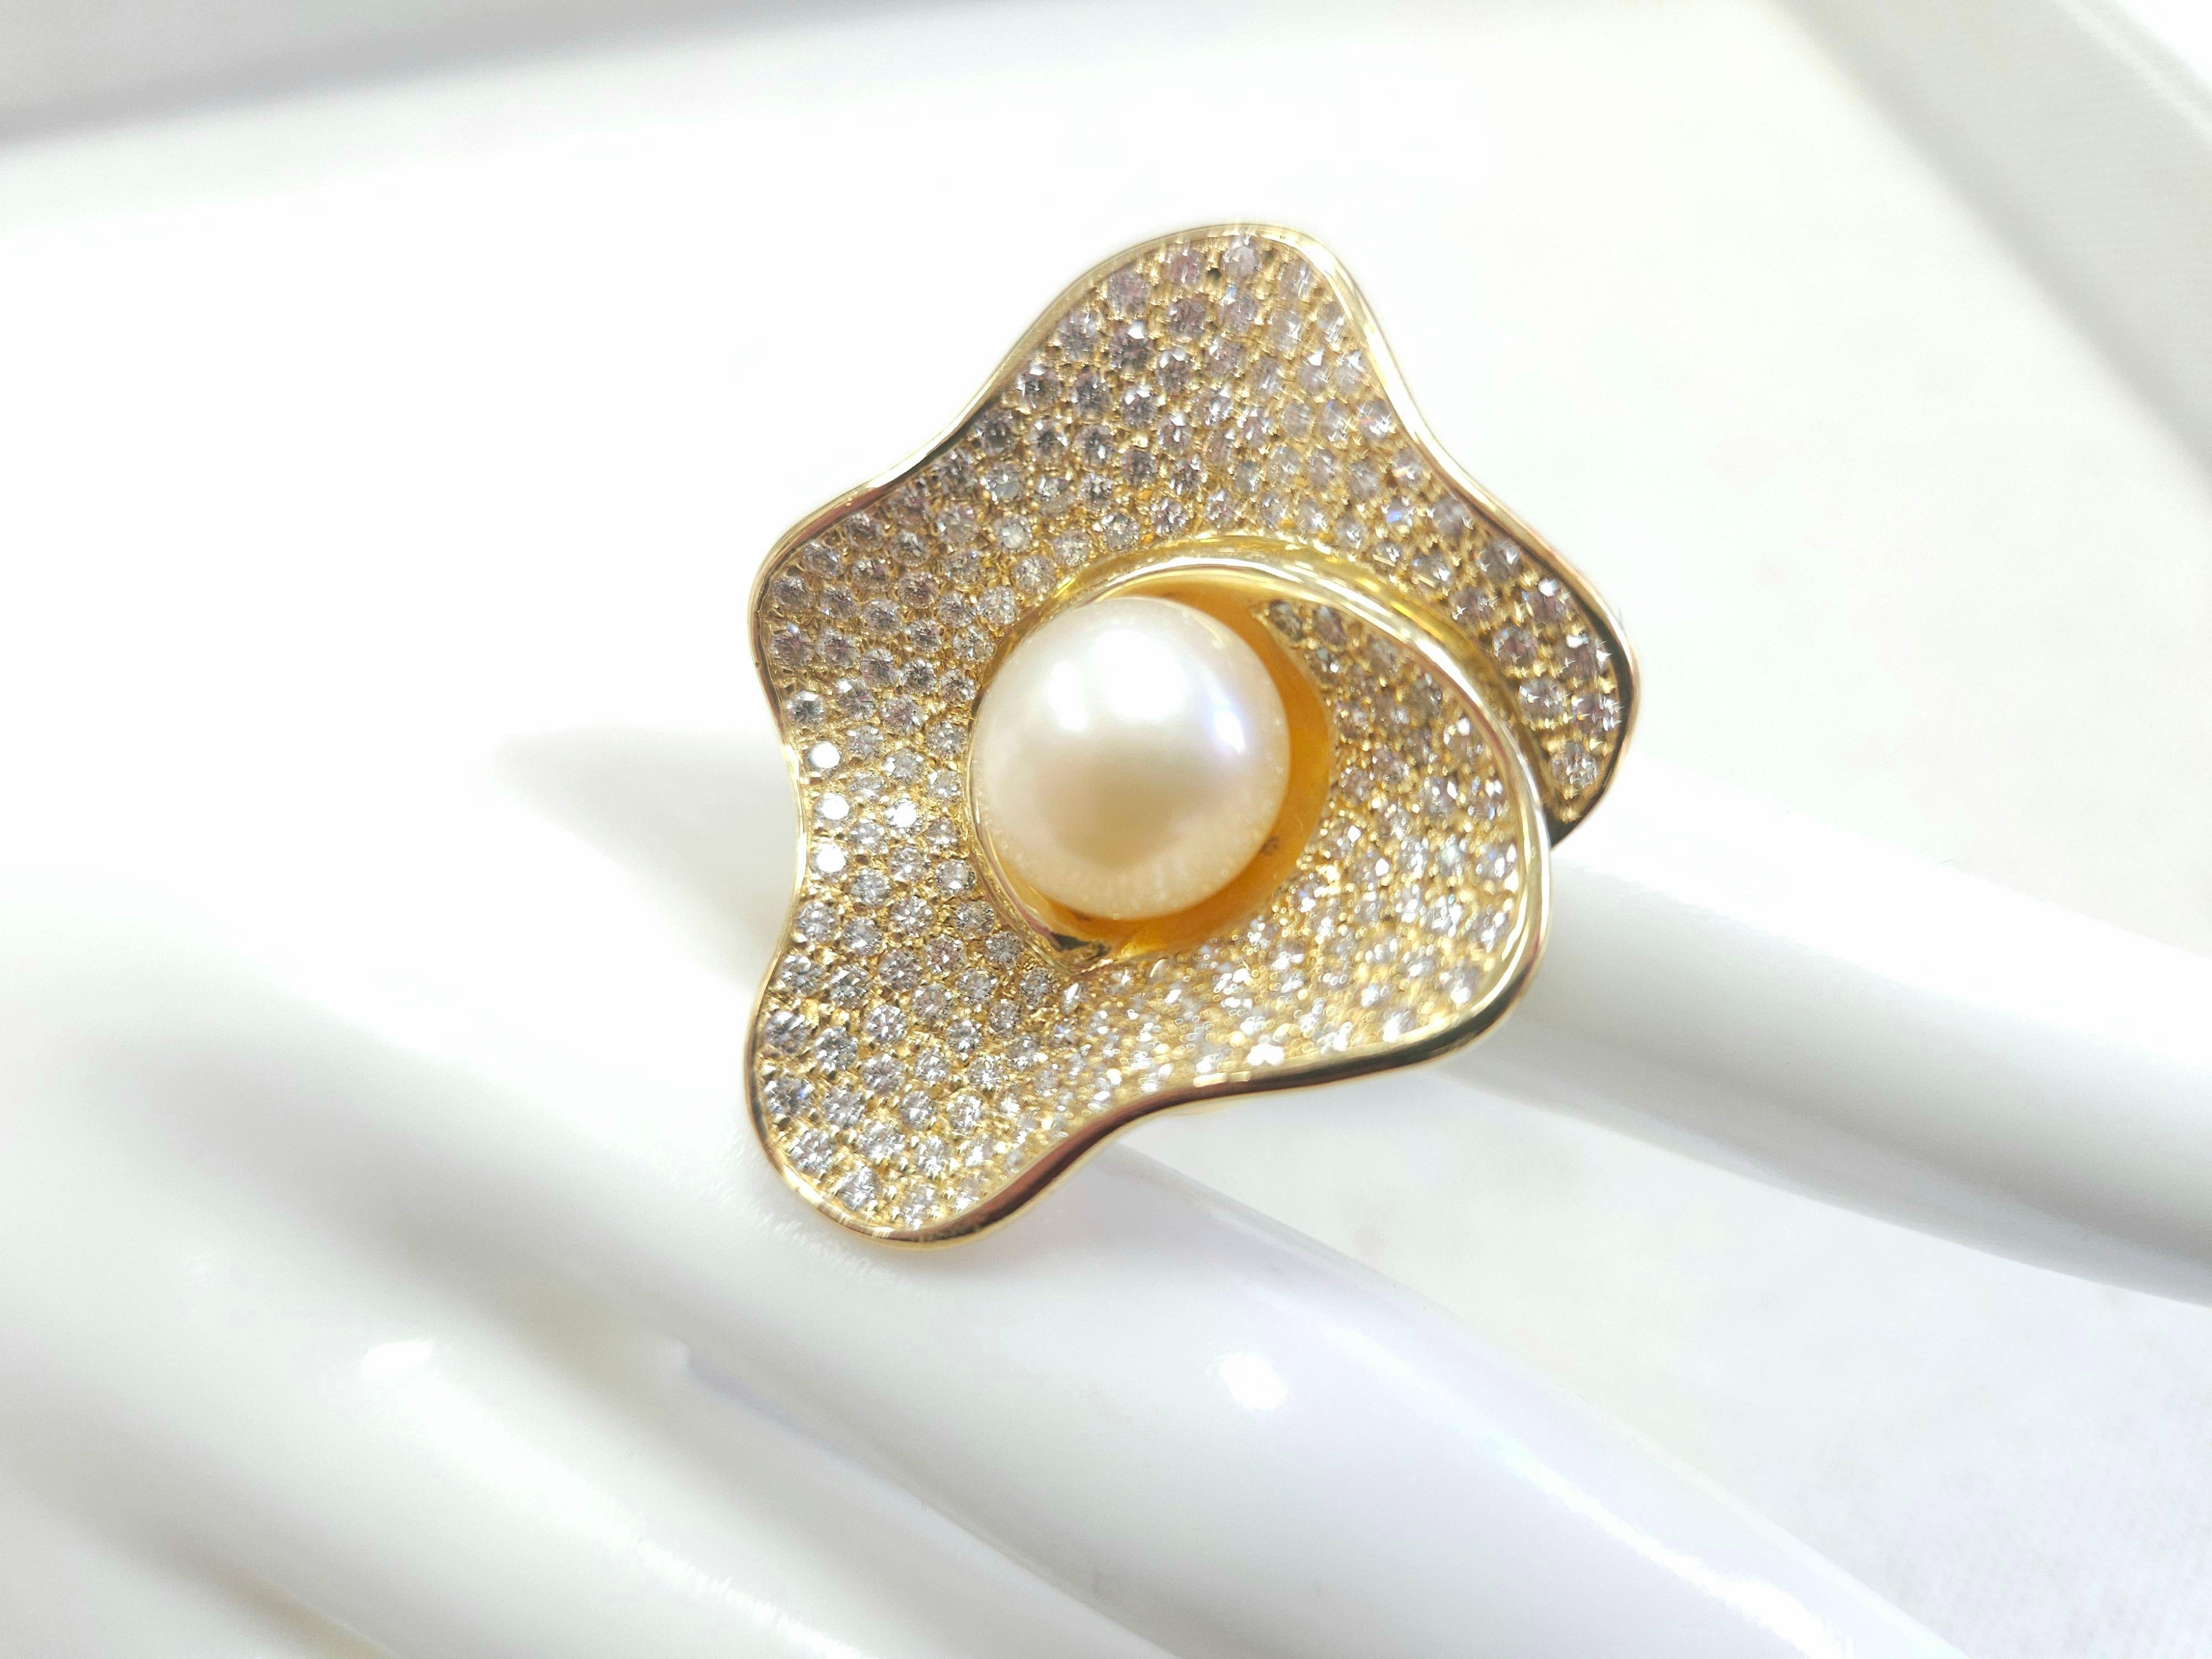 Desginer Hand made Series, Pearl DIAN 18K Yellow Gold ring, size 7, Average F-VS, 22.95 grams.

*Free Shipping within U.S*